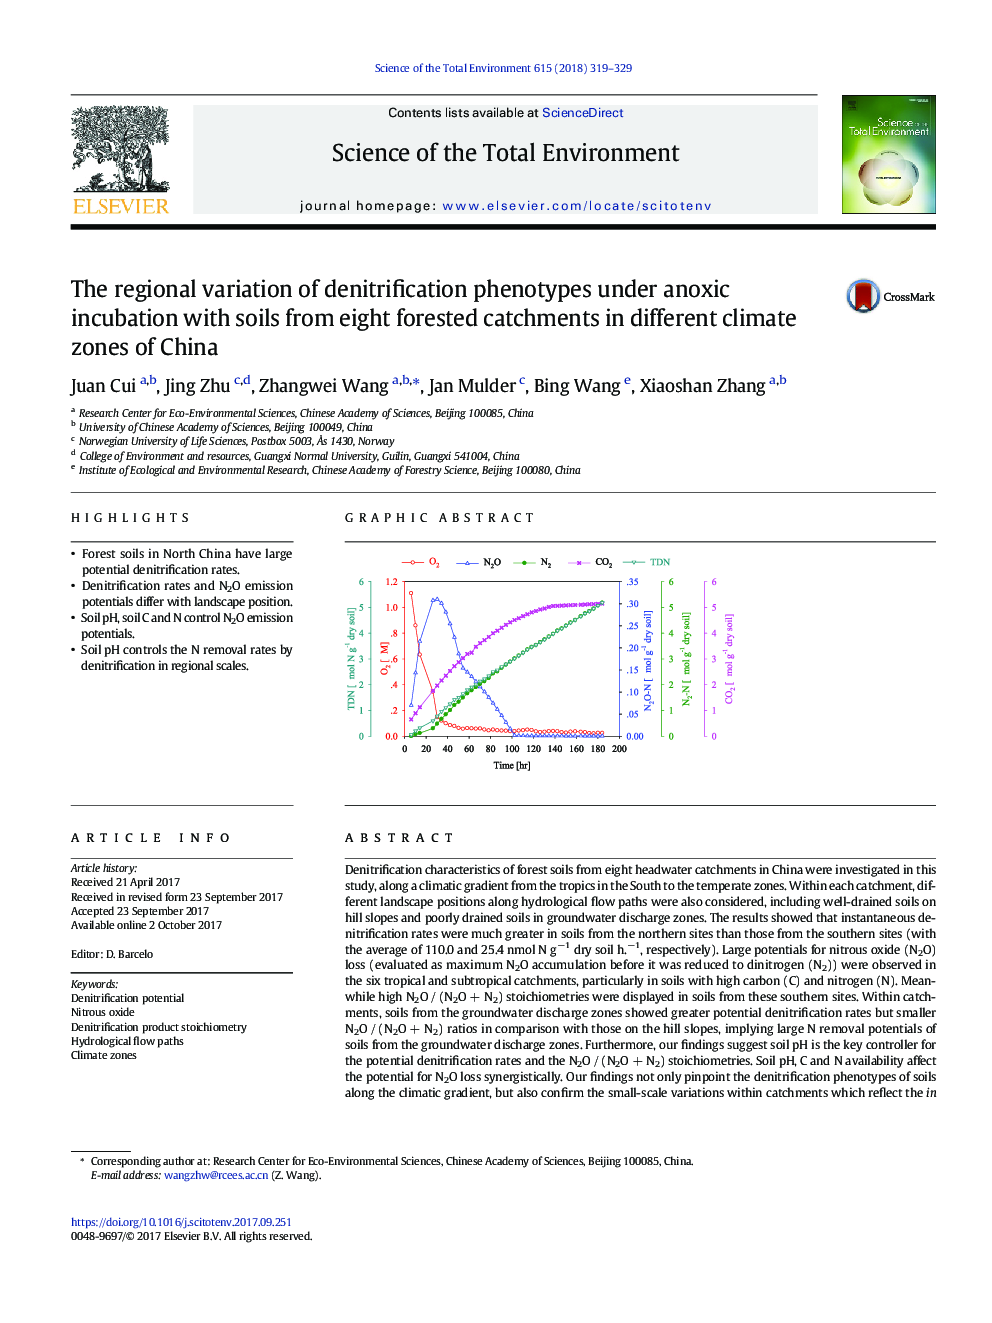 The regional variation of denitrification phenotypes under anoxic incubation with soils from eight forested catchments in different climate zones of China